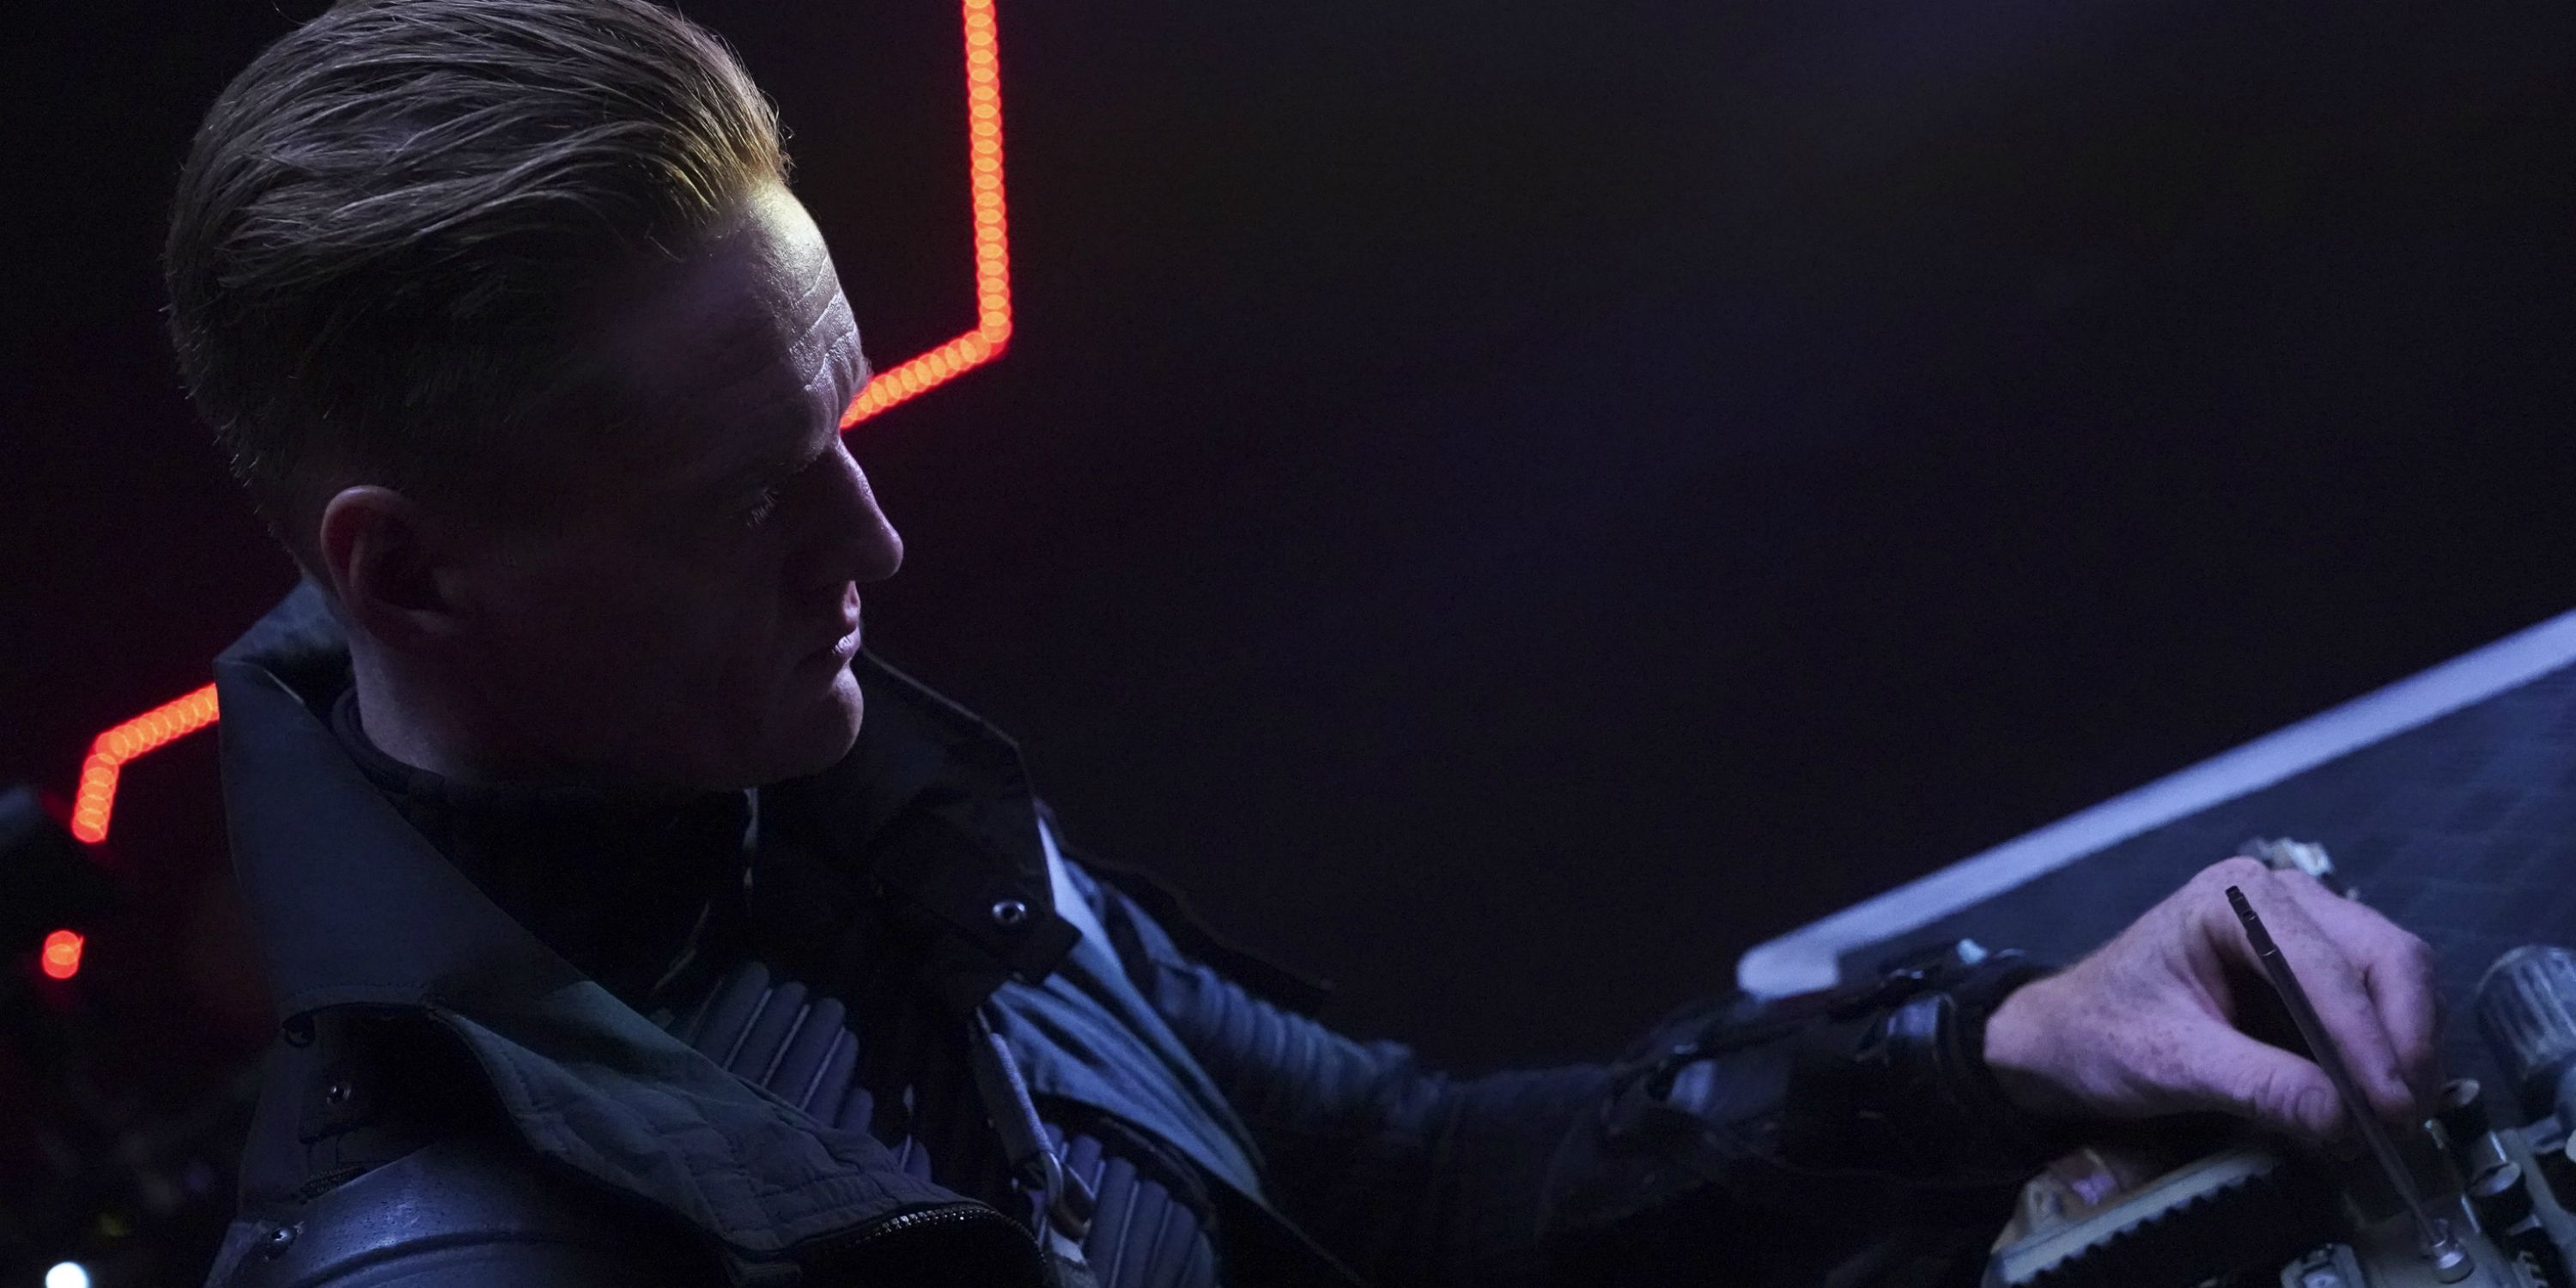 Agents Of SHIELD 11 Unanswered Questions After The Season 6 Finale